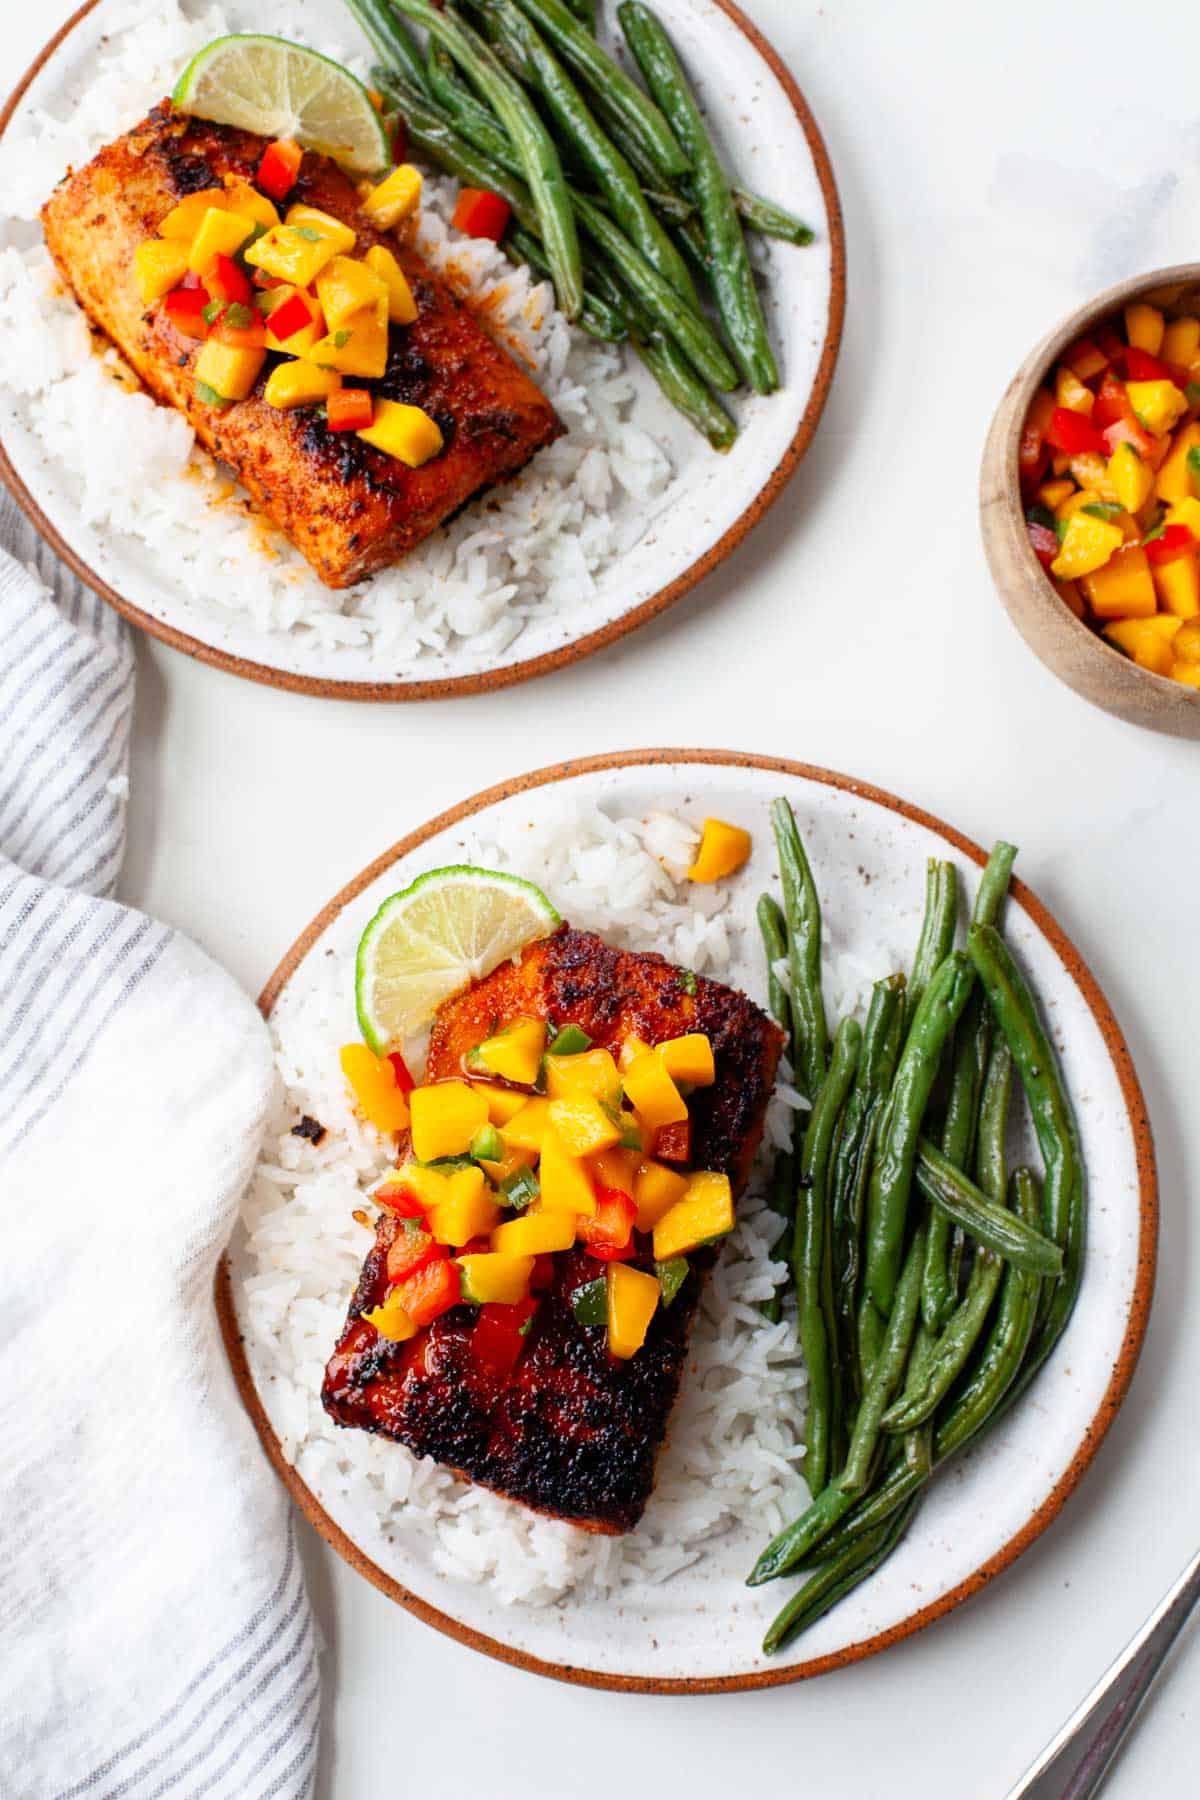 two plates of blackened mahi mahi on beds of white rice, garnished with fresh mango salsa and served with green beans